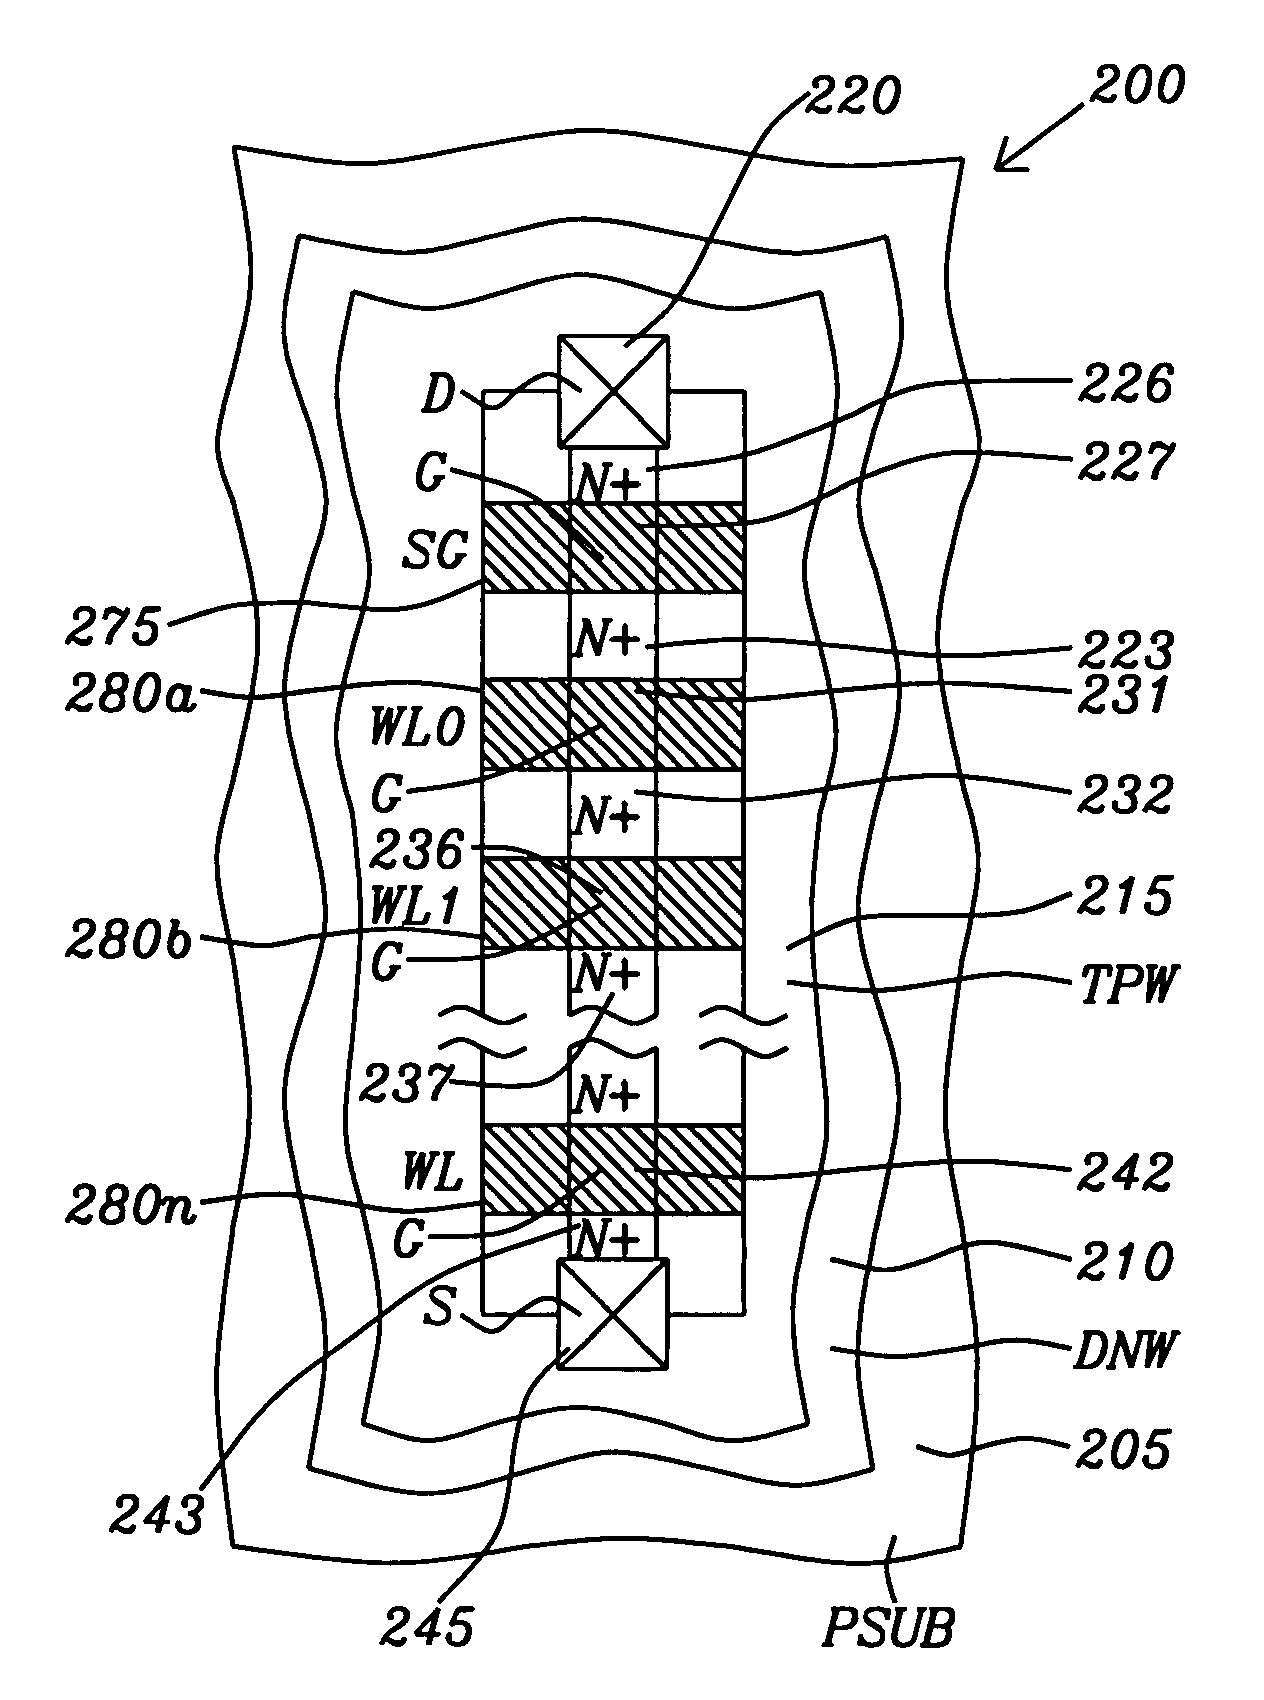 NAND string based NAND/NOR flash memory cell, array, and memory device having parallel bit lines and source lines, having a programmable select gating transistor, and circuits and methods for operating same